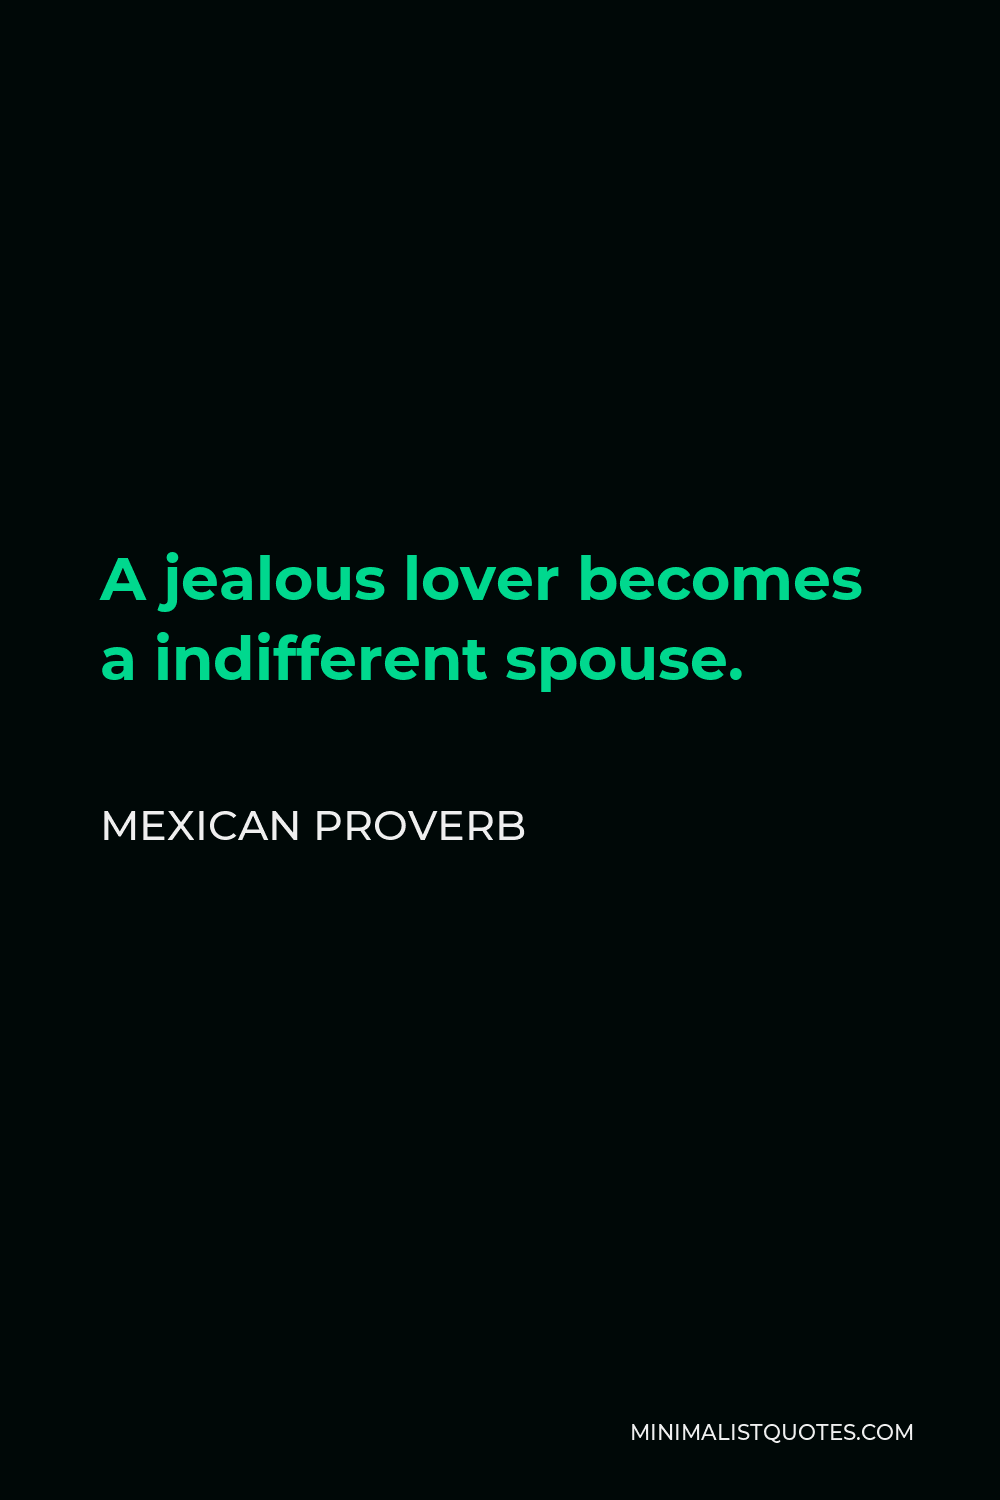 Mexican Proverb Quote - A jealous lover becomes a indifferent spouse.